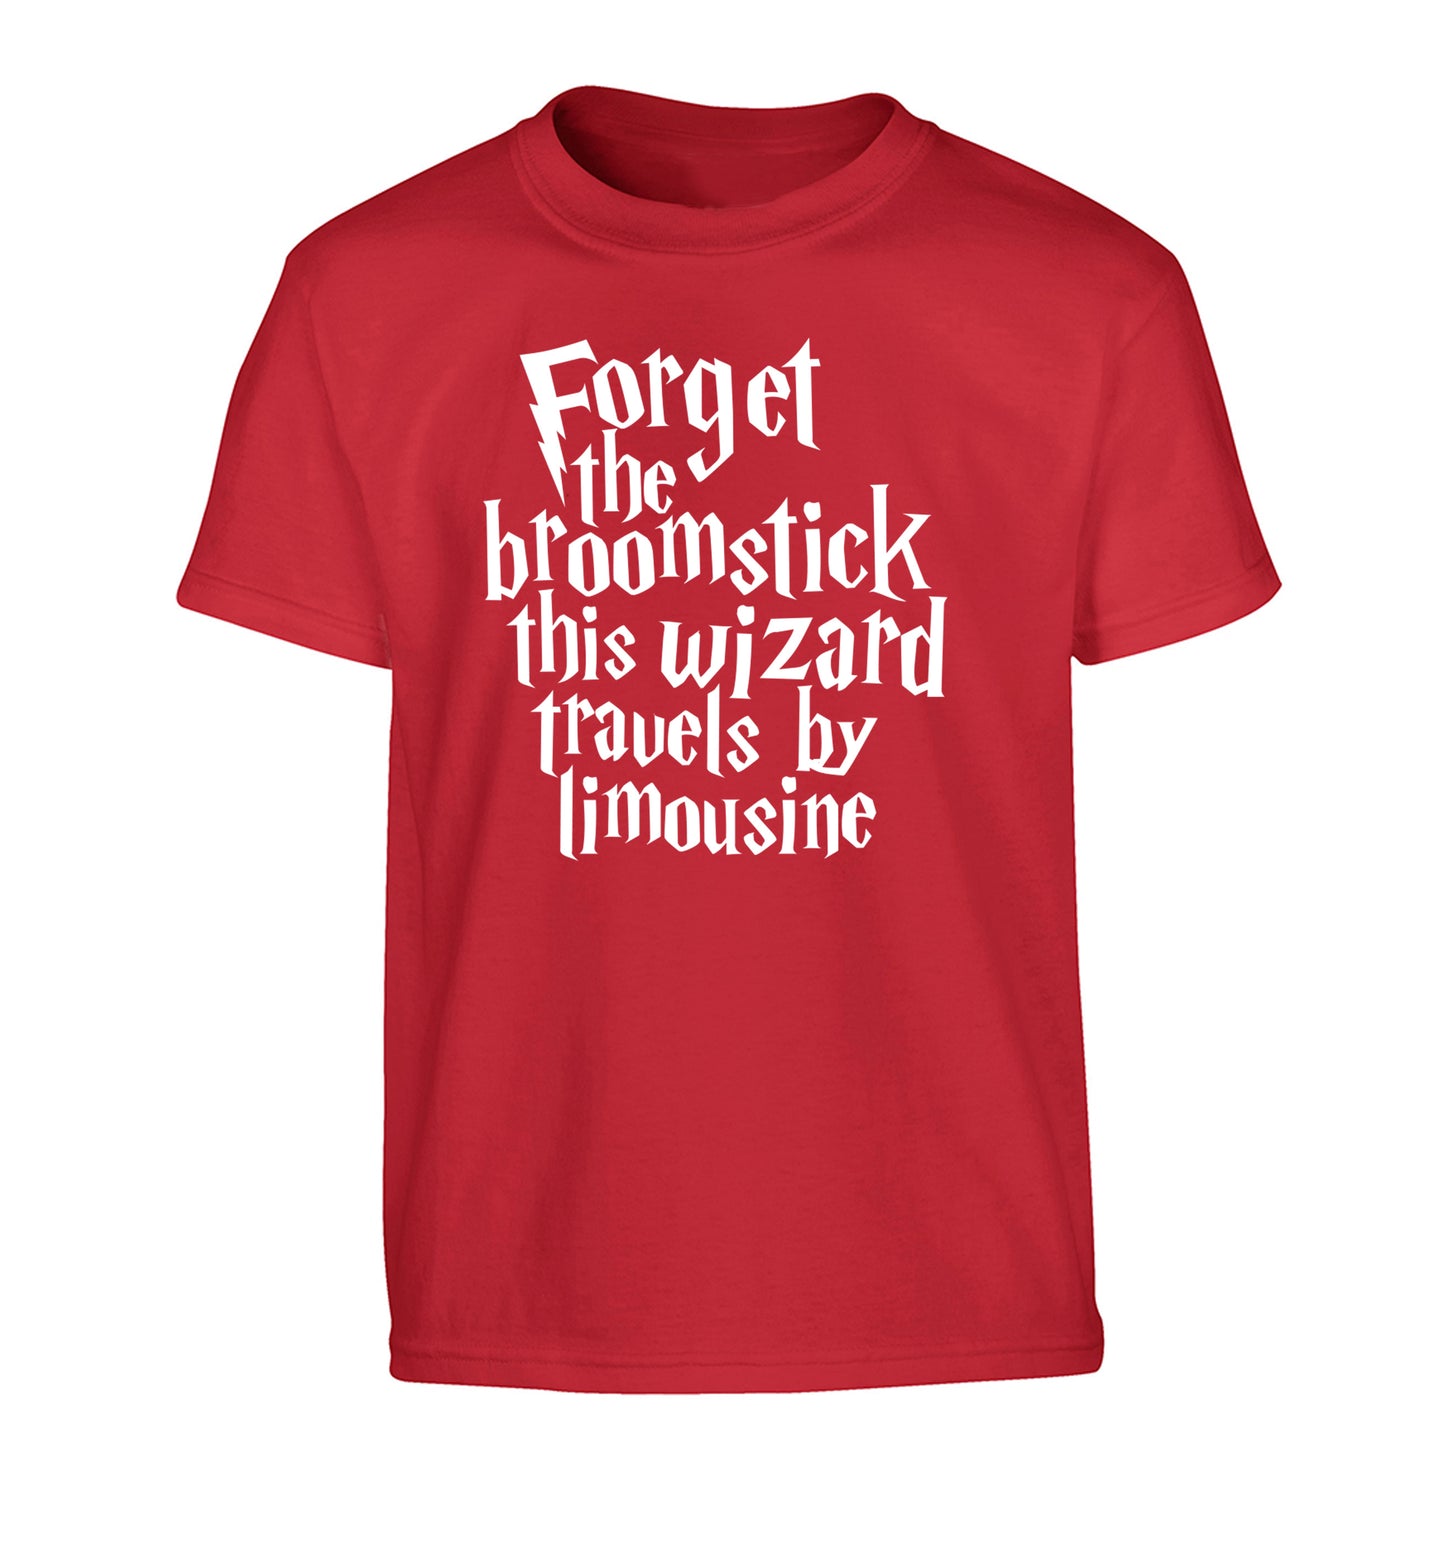 Forget the broomstick this wizard travels by limousine Children's red Tshirt 12-14 Years